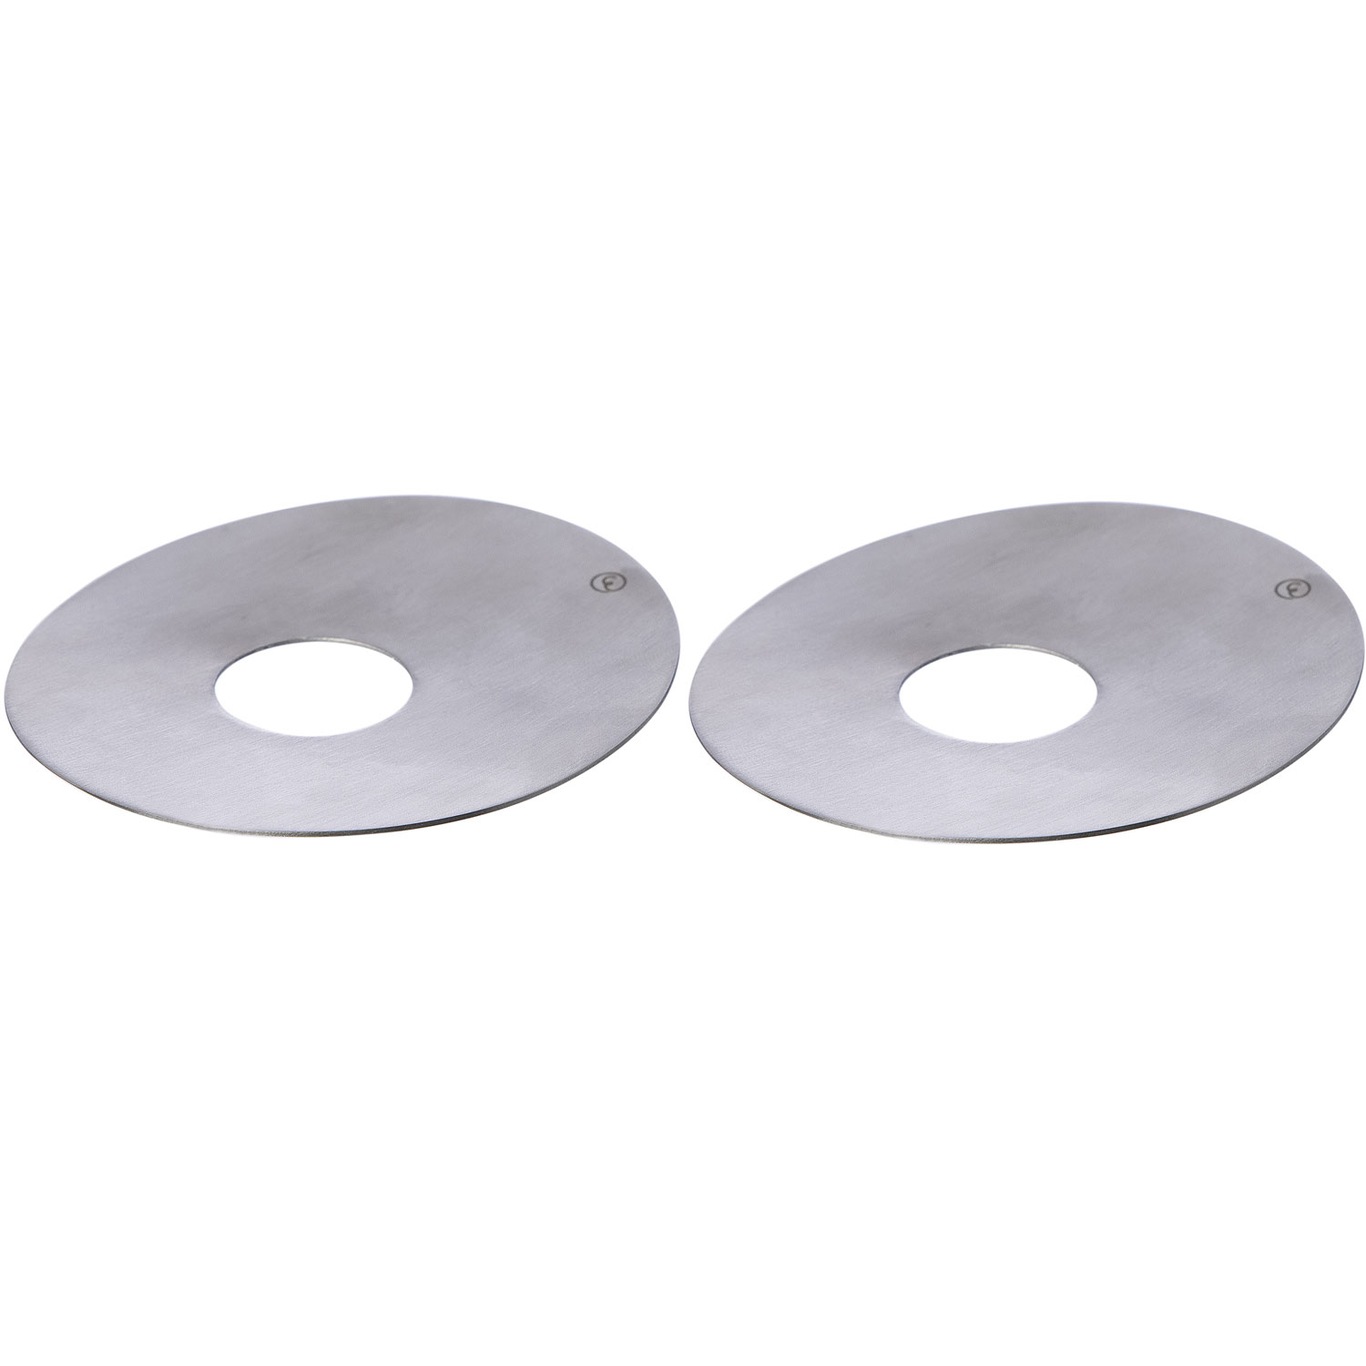 Candle Ring Brushed Metal 2-pack